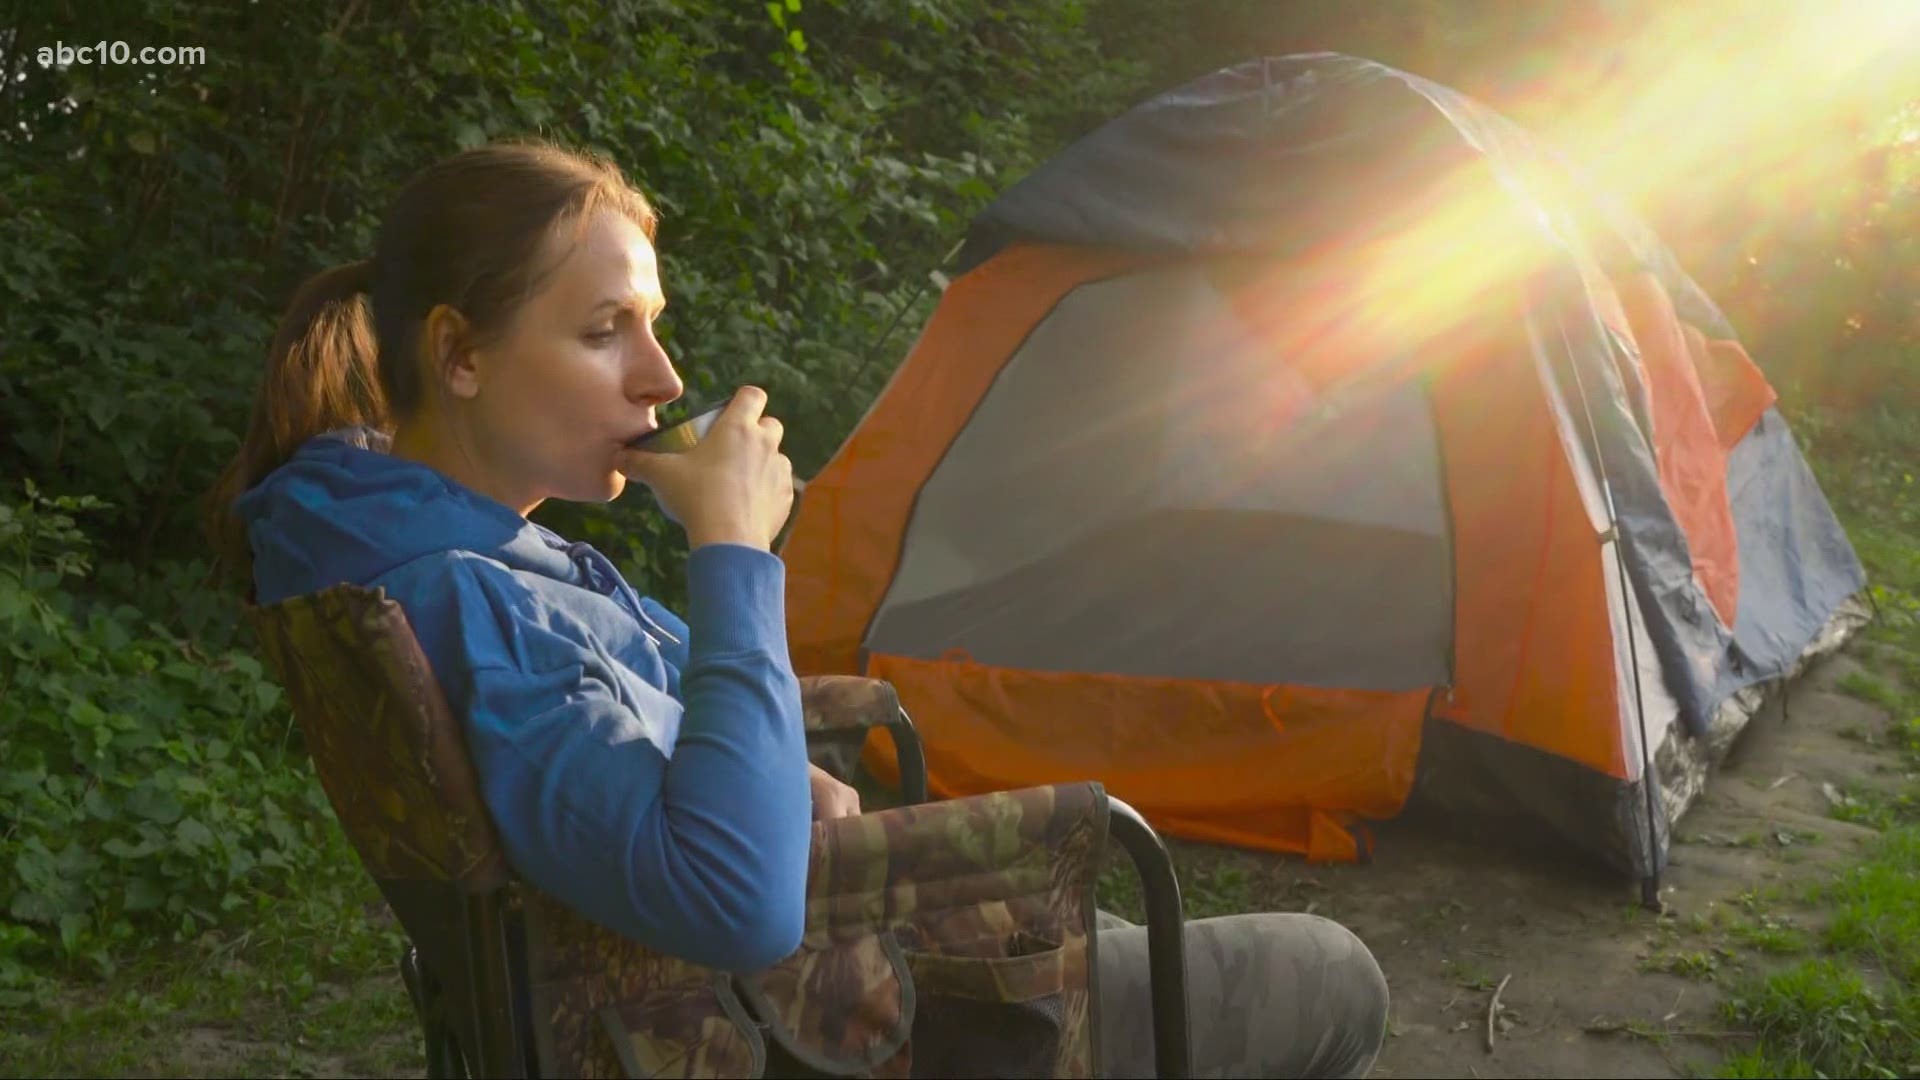 Travel Mom Emily Kaufman provides tips for camping before you go explore the great outdoors.